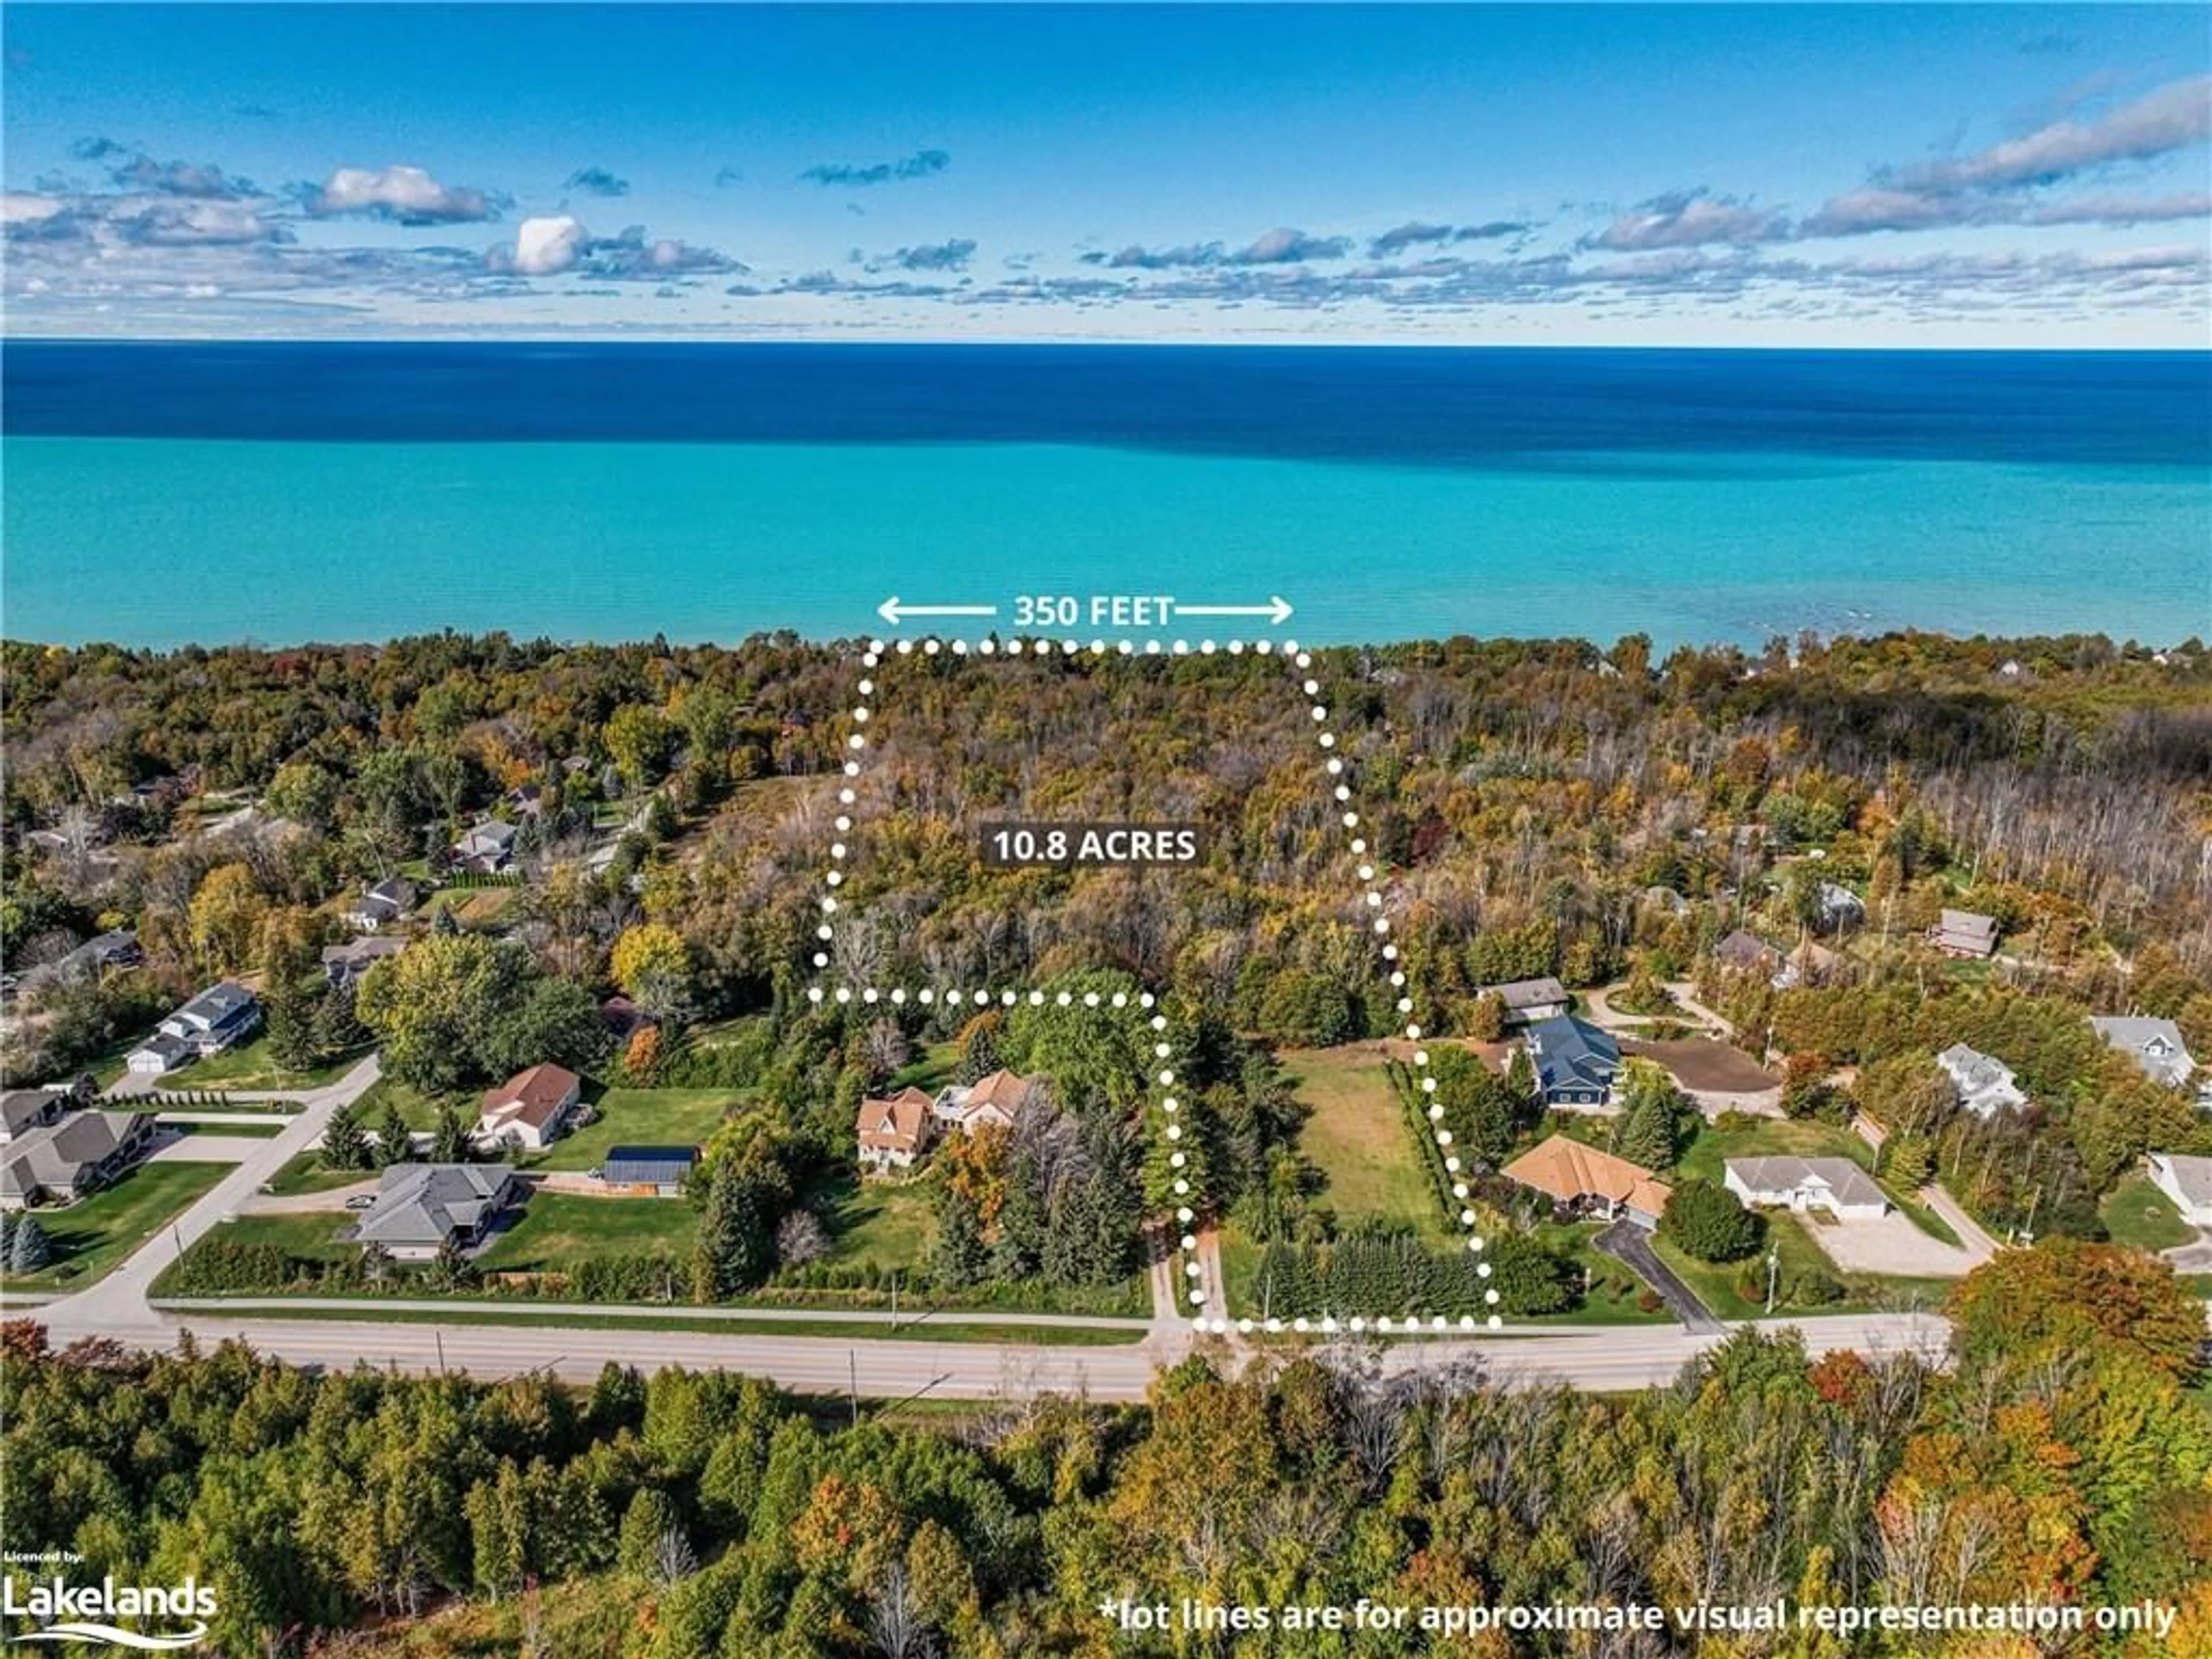 Lakeview for 229 Bruce Road 23, Kincardine Ontario N2Z 2X6